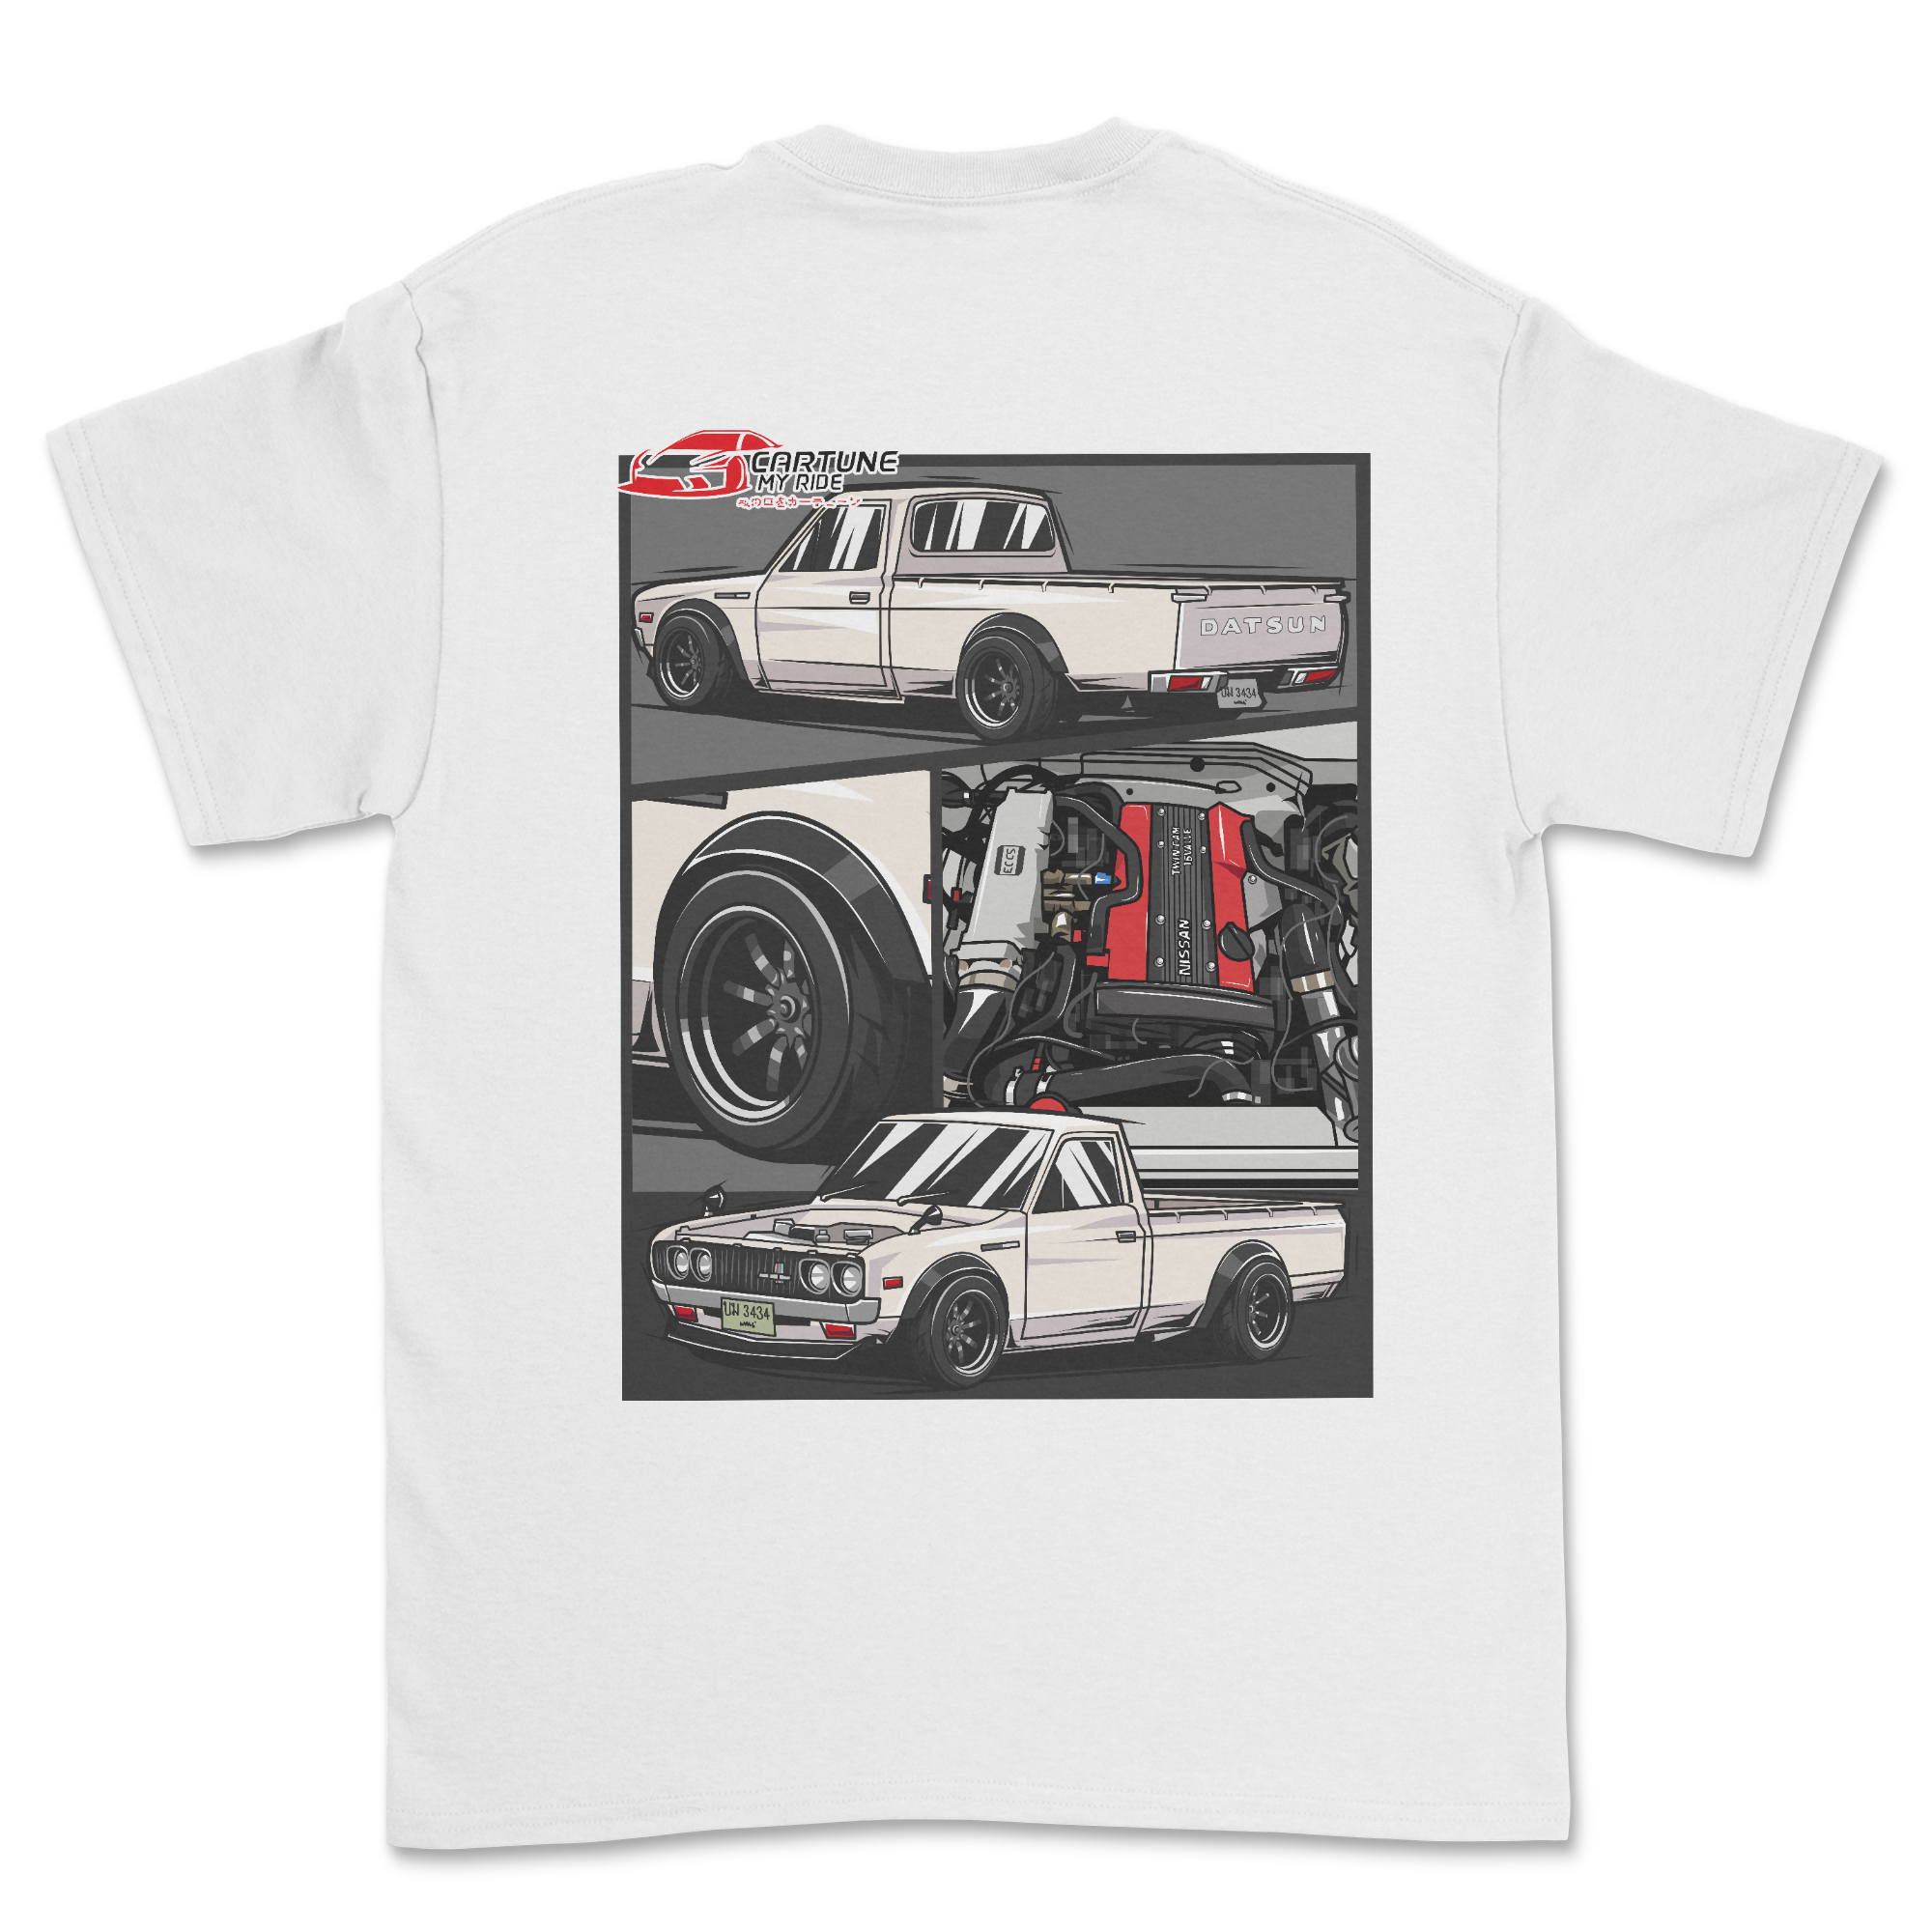 Cartuned™ Personalized Heavy-weight Tee(Full Design)